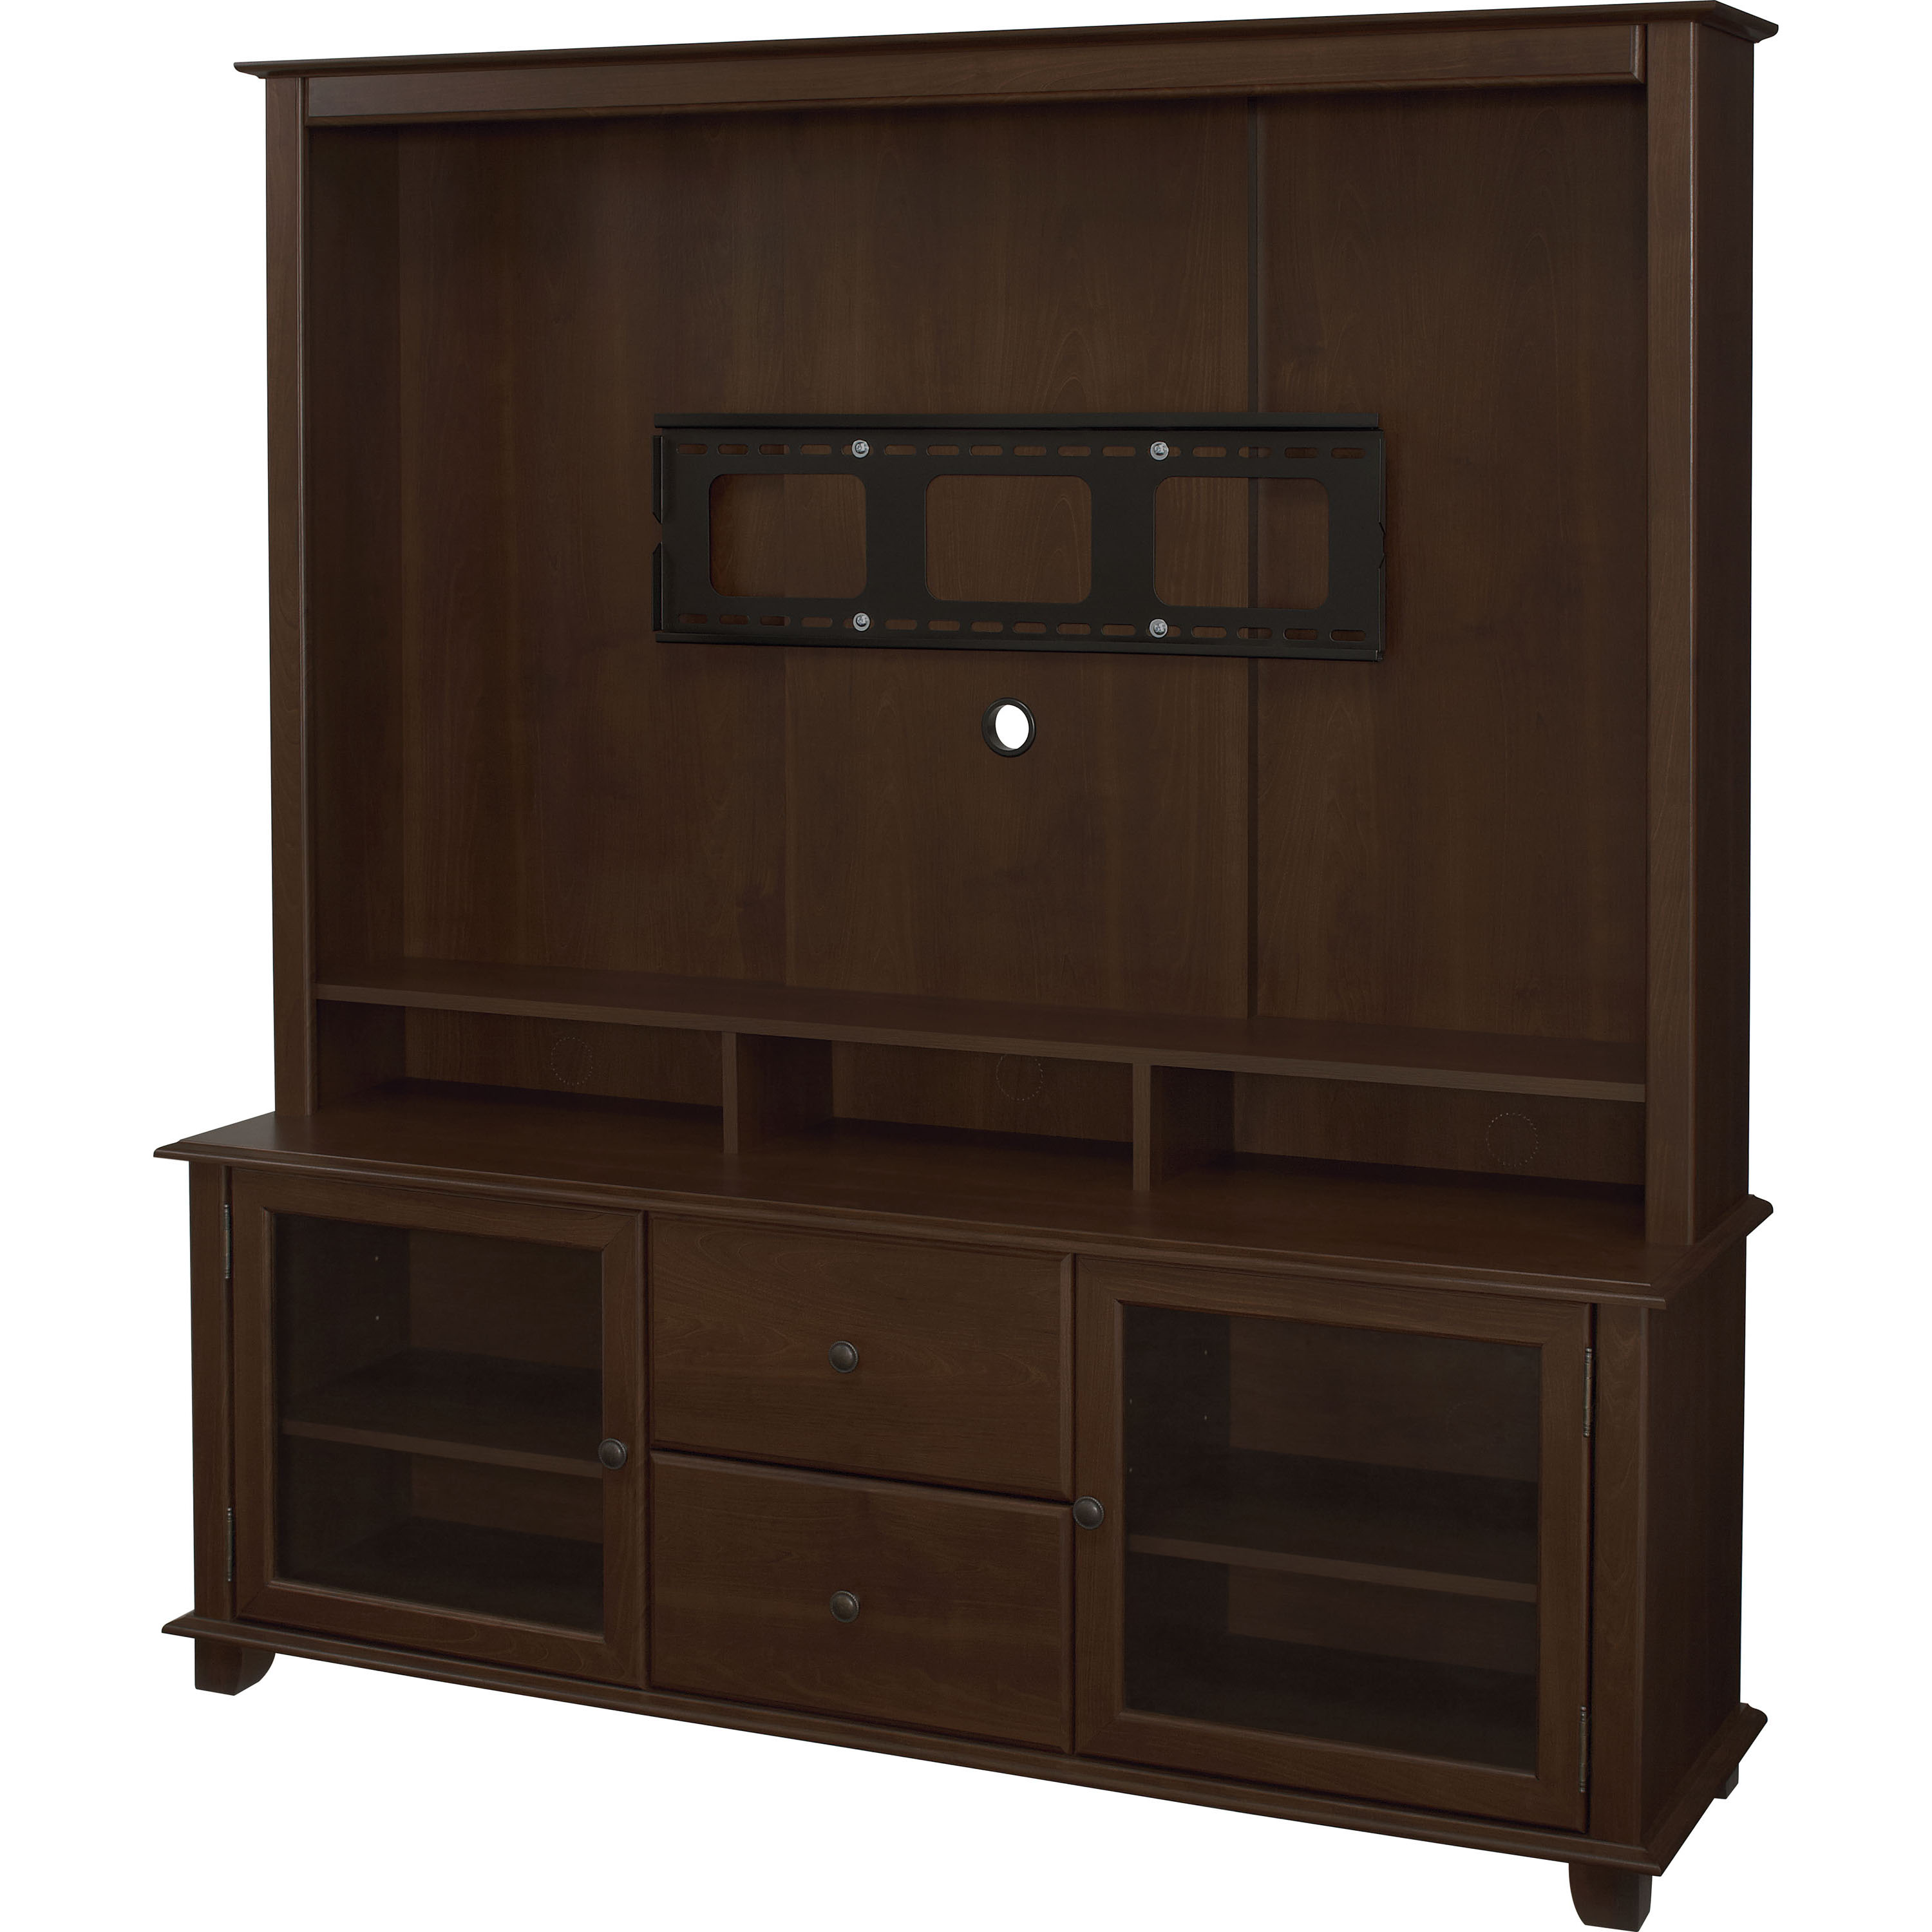 Bedford TV Stand Entertainment Center: Two Easy Glide ...